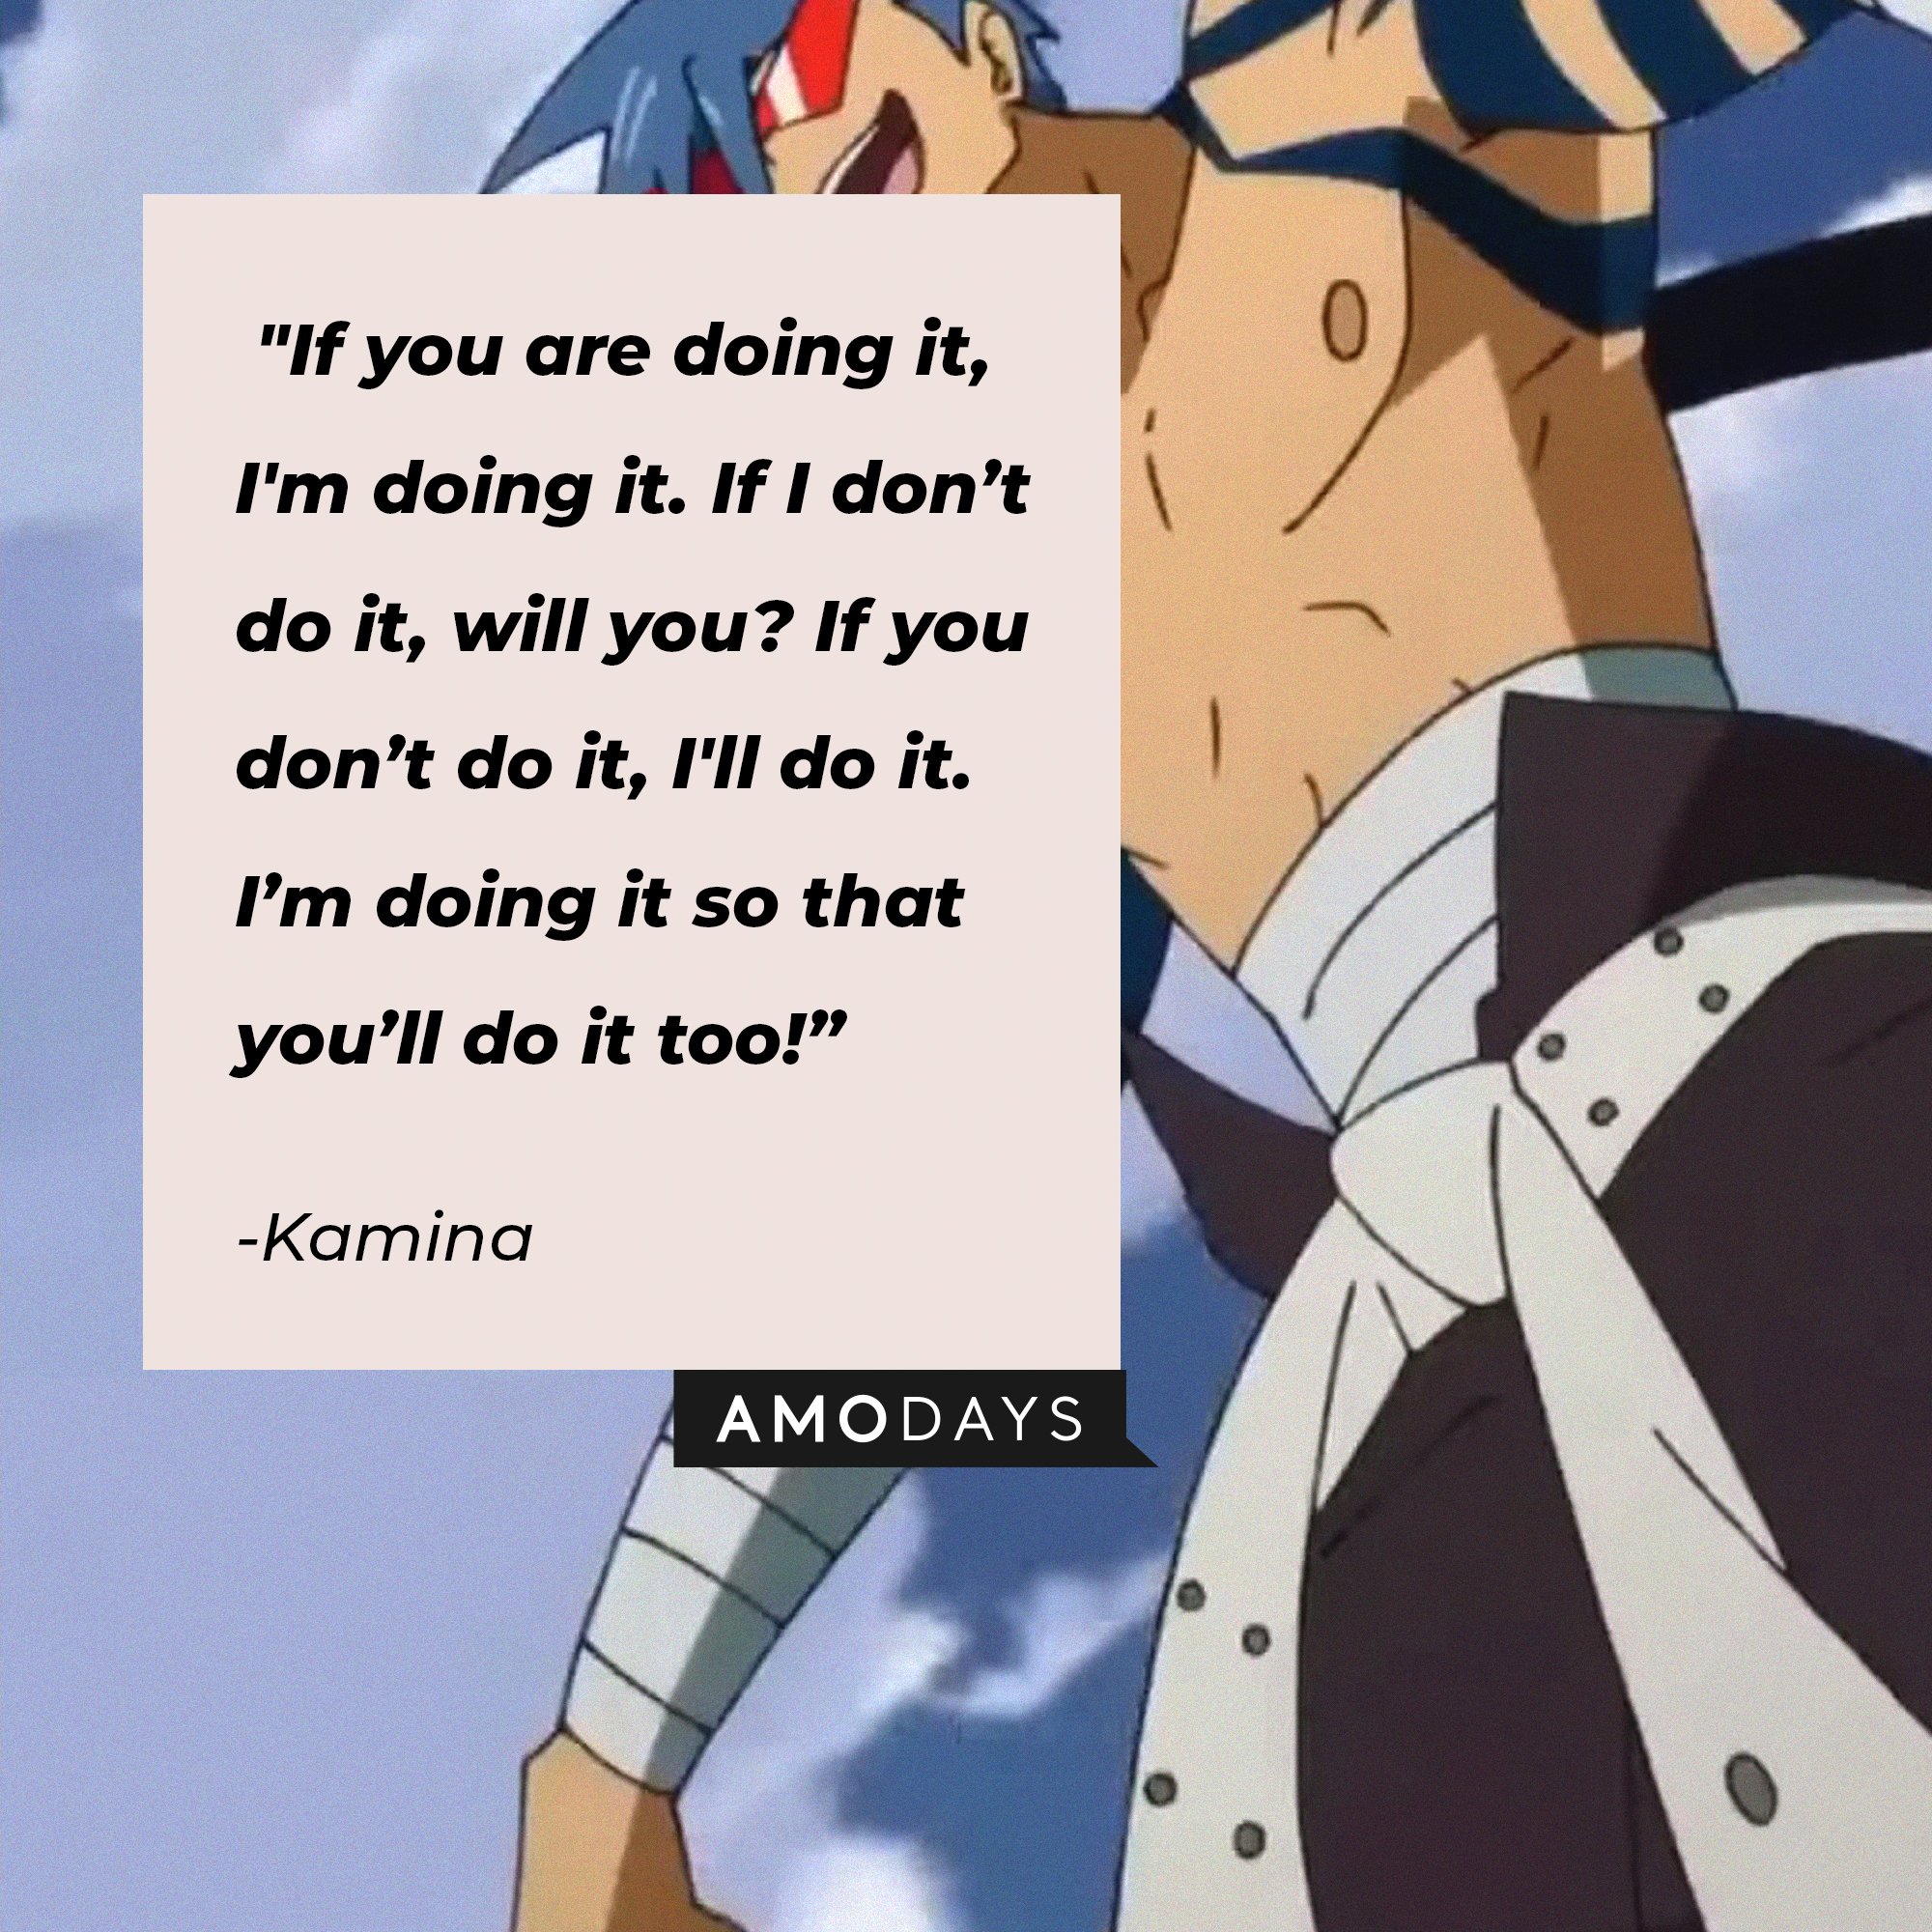 Kamina's quote: "If you are doing it, I'm doing it. If I don’t do it, will you? If you don’t do it, I'll do it. I’m doing it so that you’ll do it too!” | Image: AmoDays    